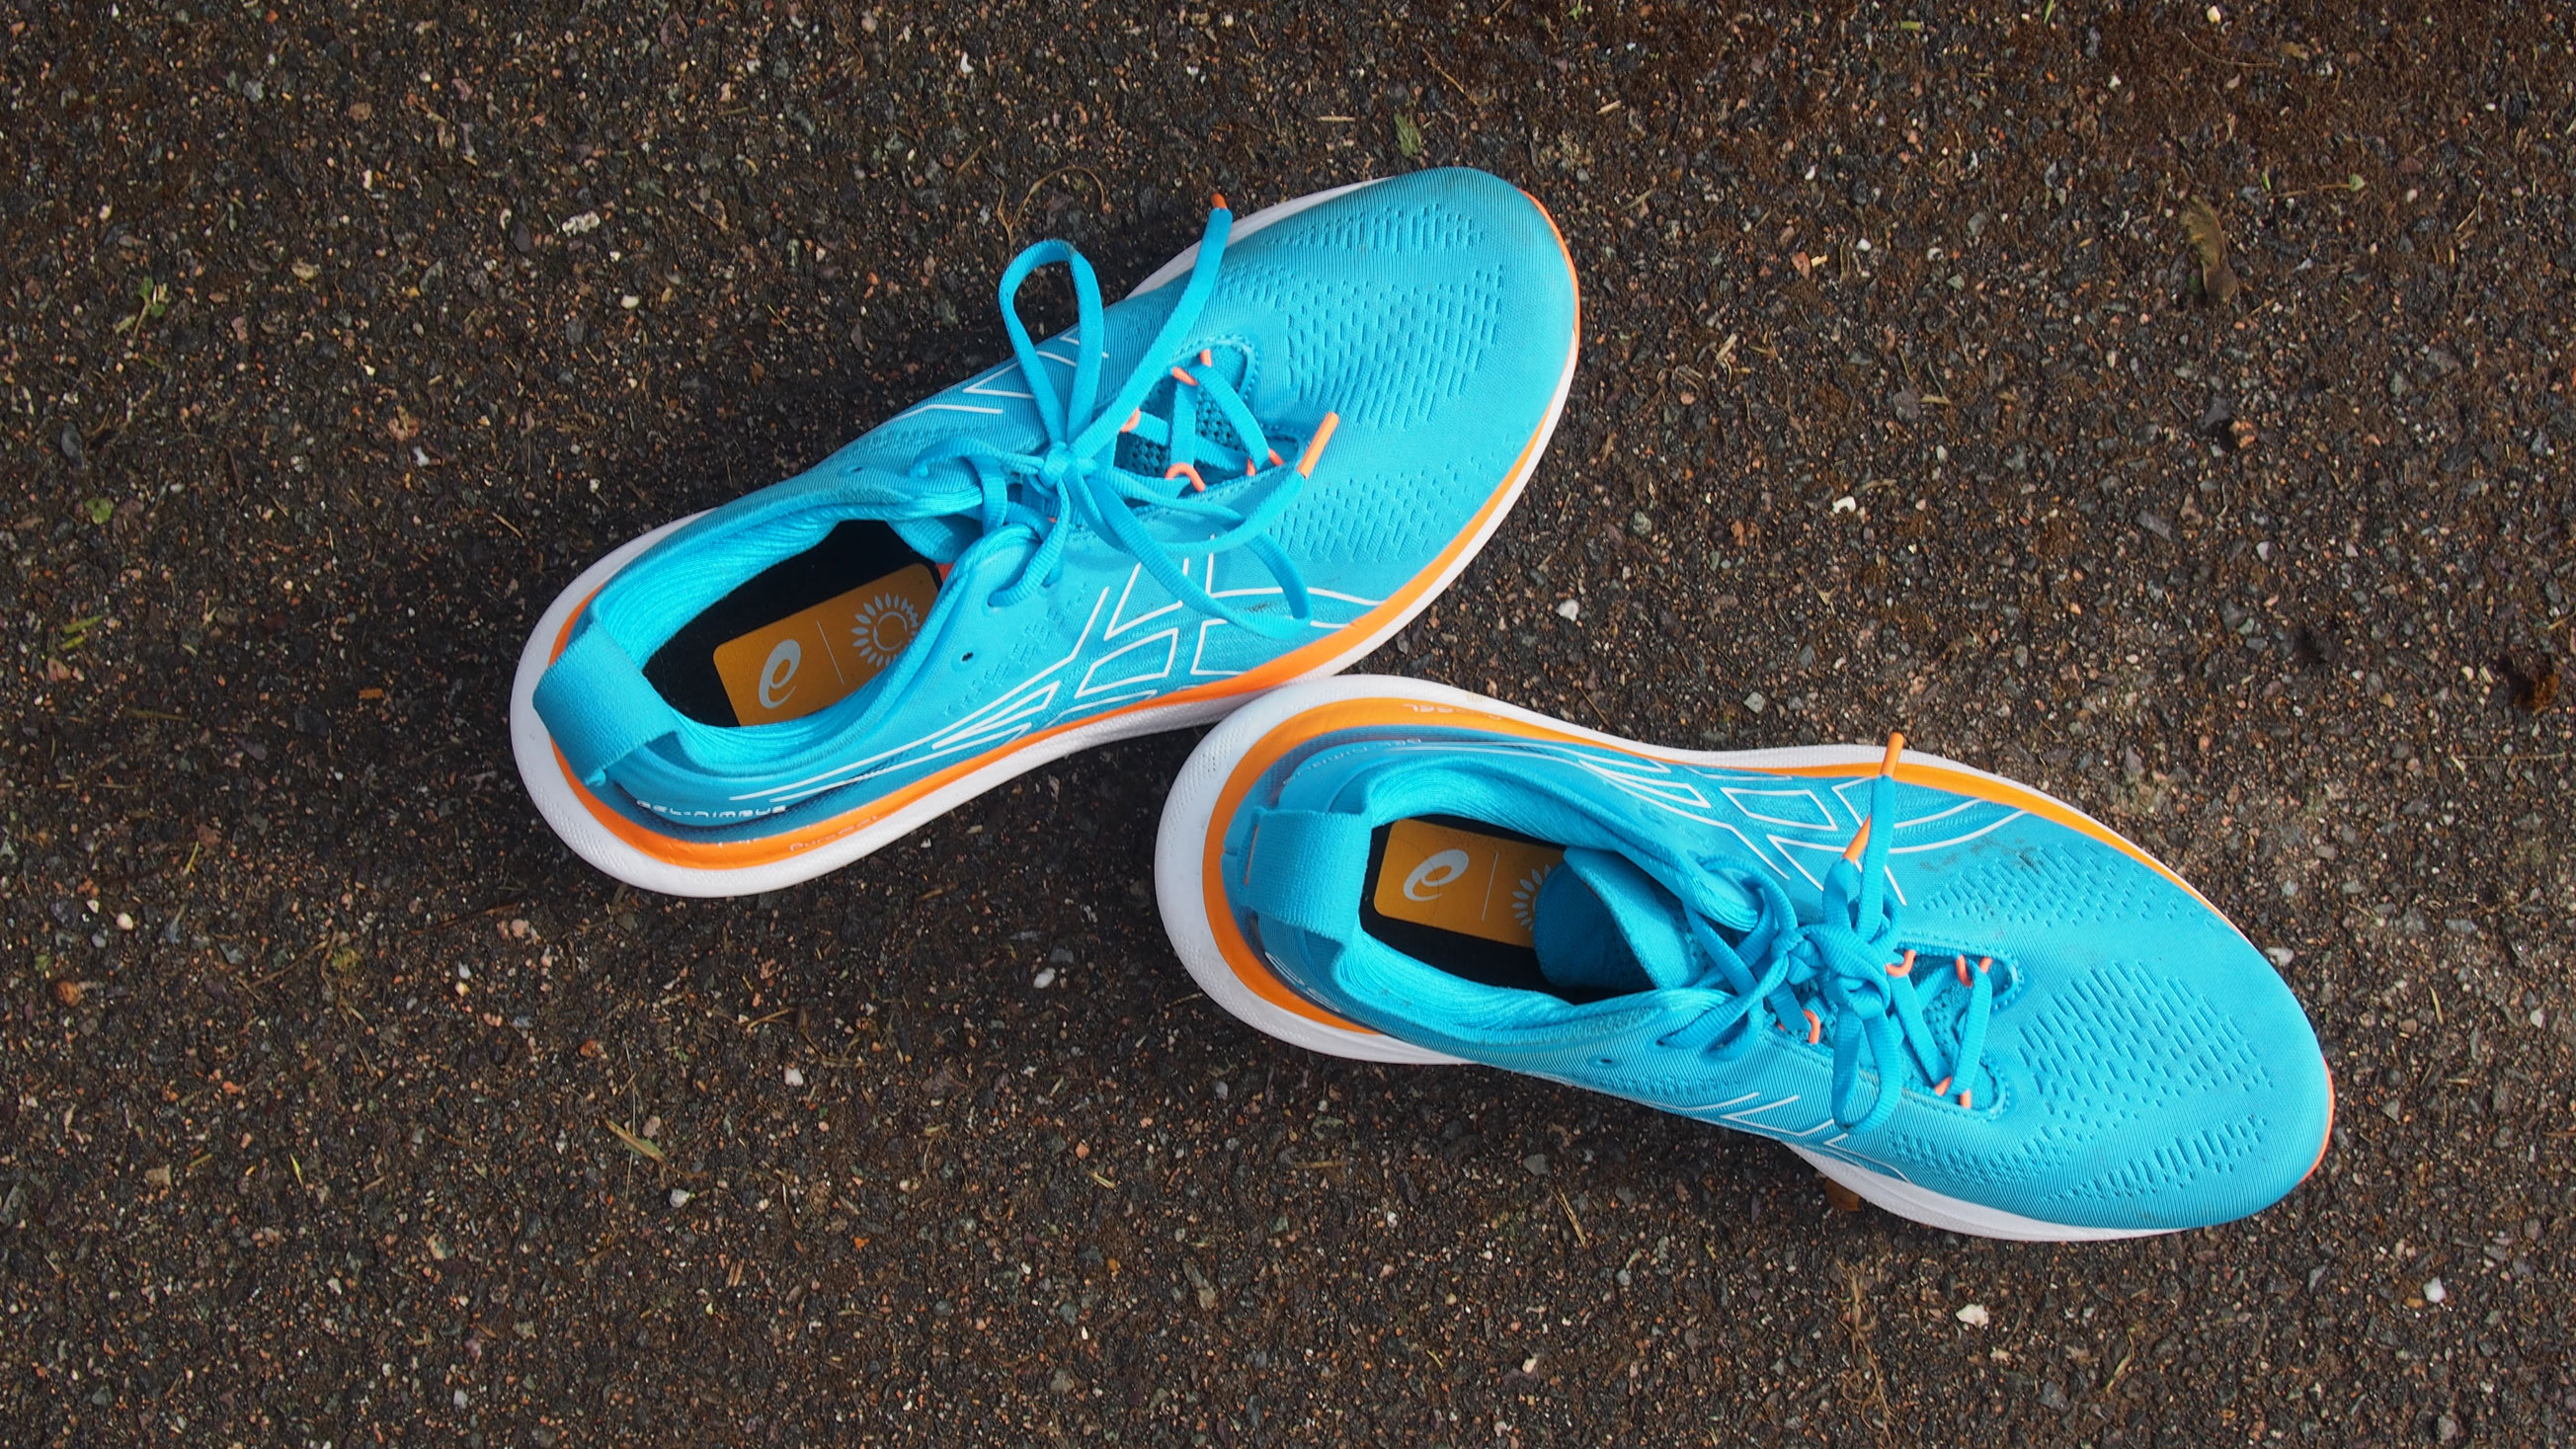 The ASICS Gel-Nimbus 25 running shoes in blue on concrete.